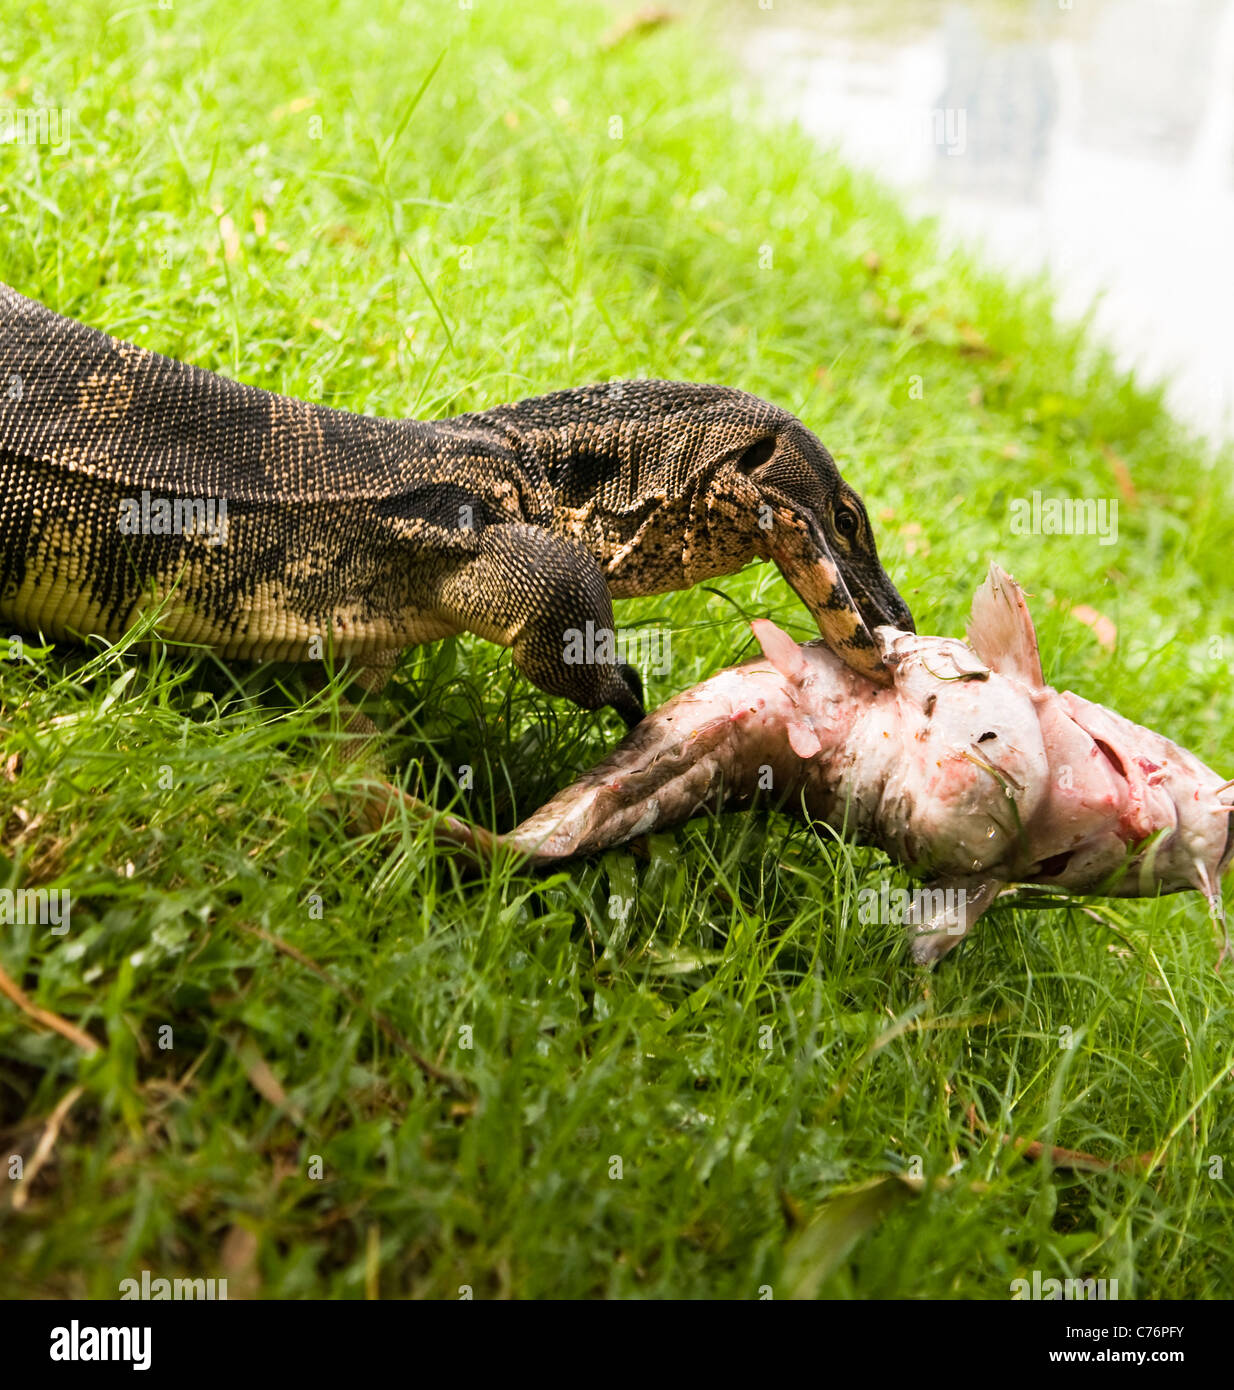 A big Monitor lizard holding a big fish in its mouth. Stock Photo